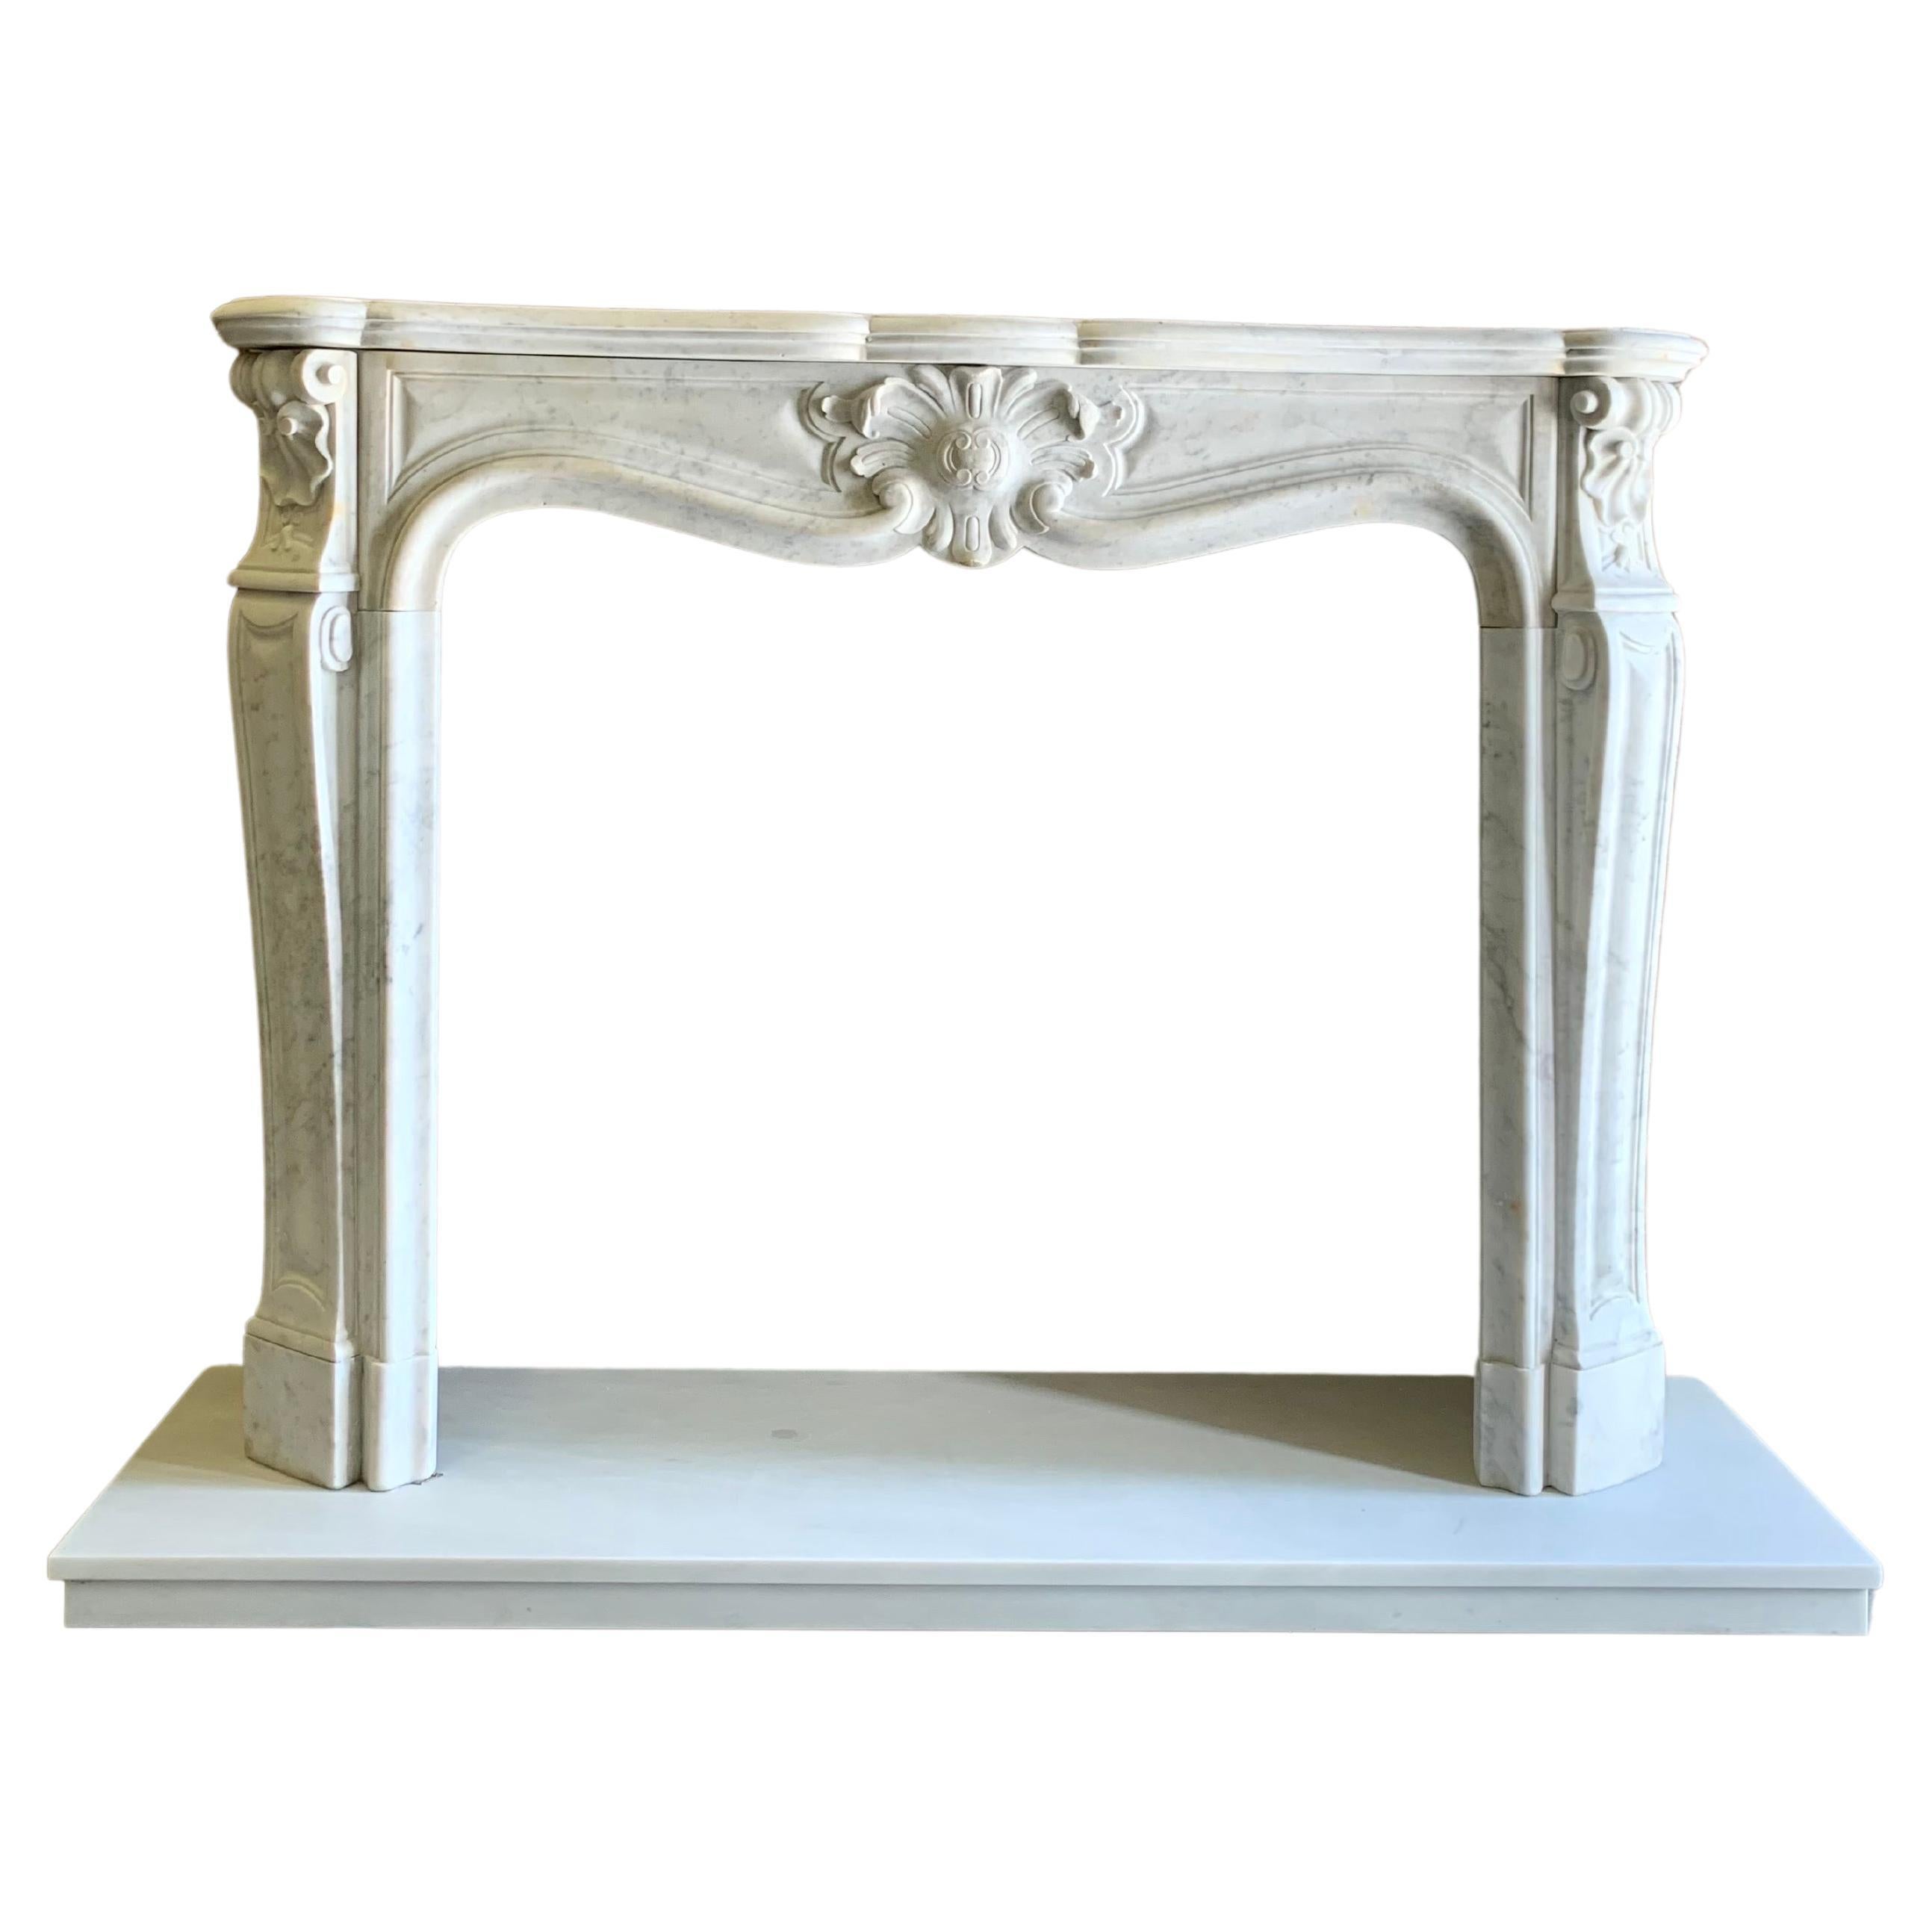 English 18th Century Louis XVI Marble Fireplace Mantlepiece